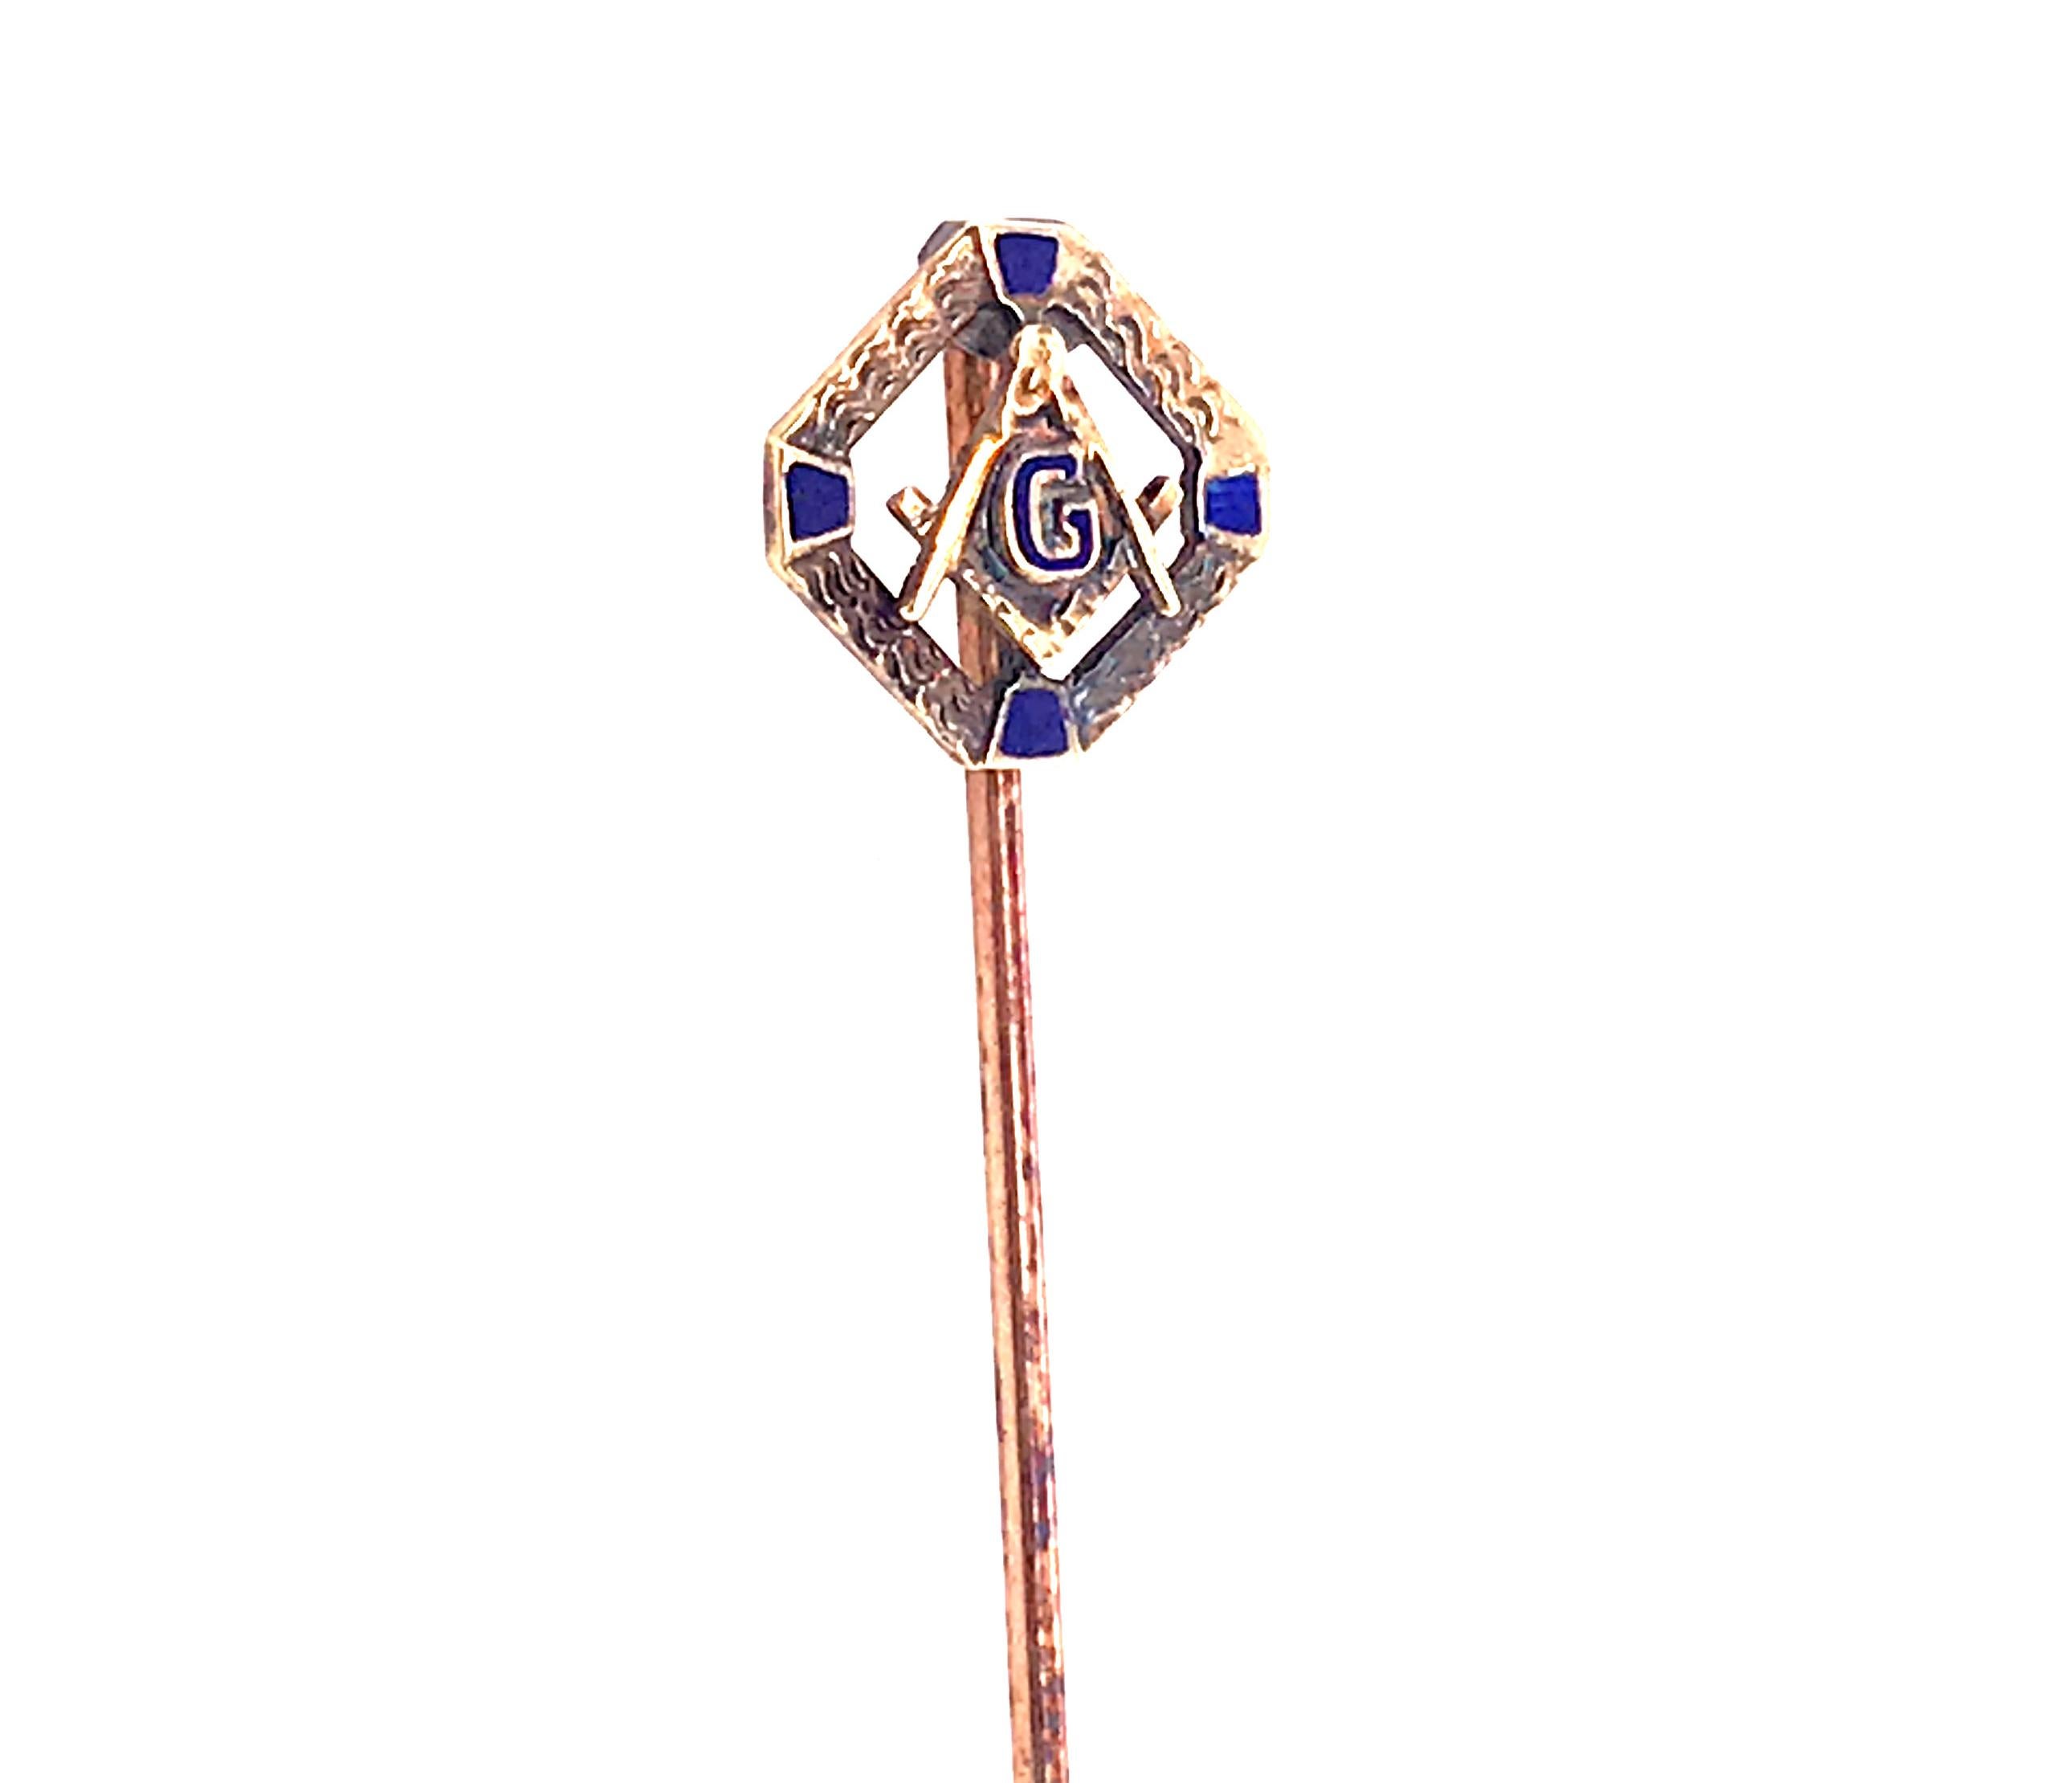 Vintage Antique Masonic Art Deco 14K Yellow Gold Stick Pin/Brooch


Masonic Emblem

Hand Painted Enamel

Solid 14K Yellow Gold With 10K Gold Top

Circa 1910's-1920's

The Art Deco Era in Jewelry Design 

Genuine Antique; Not a